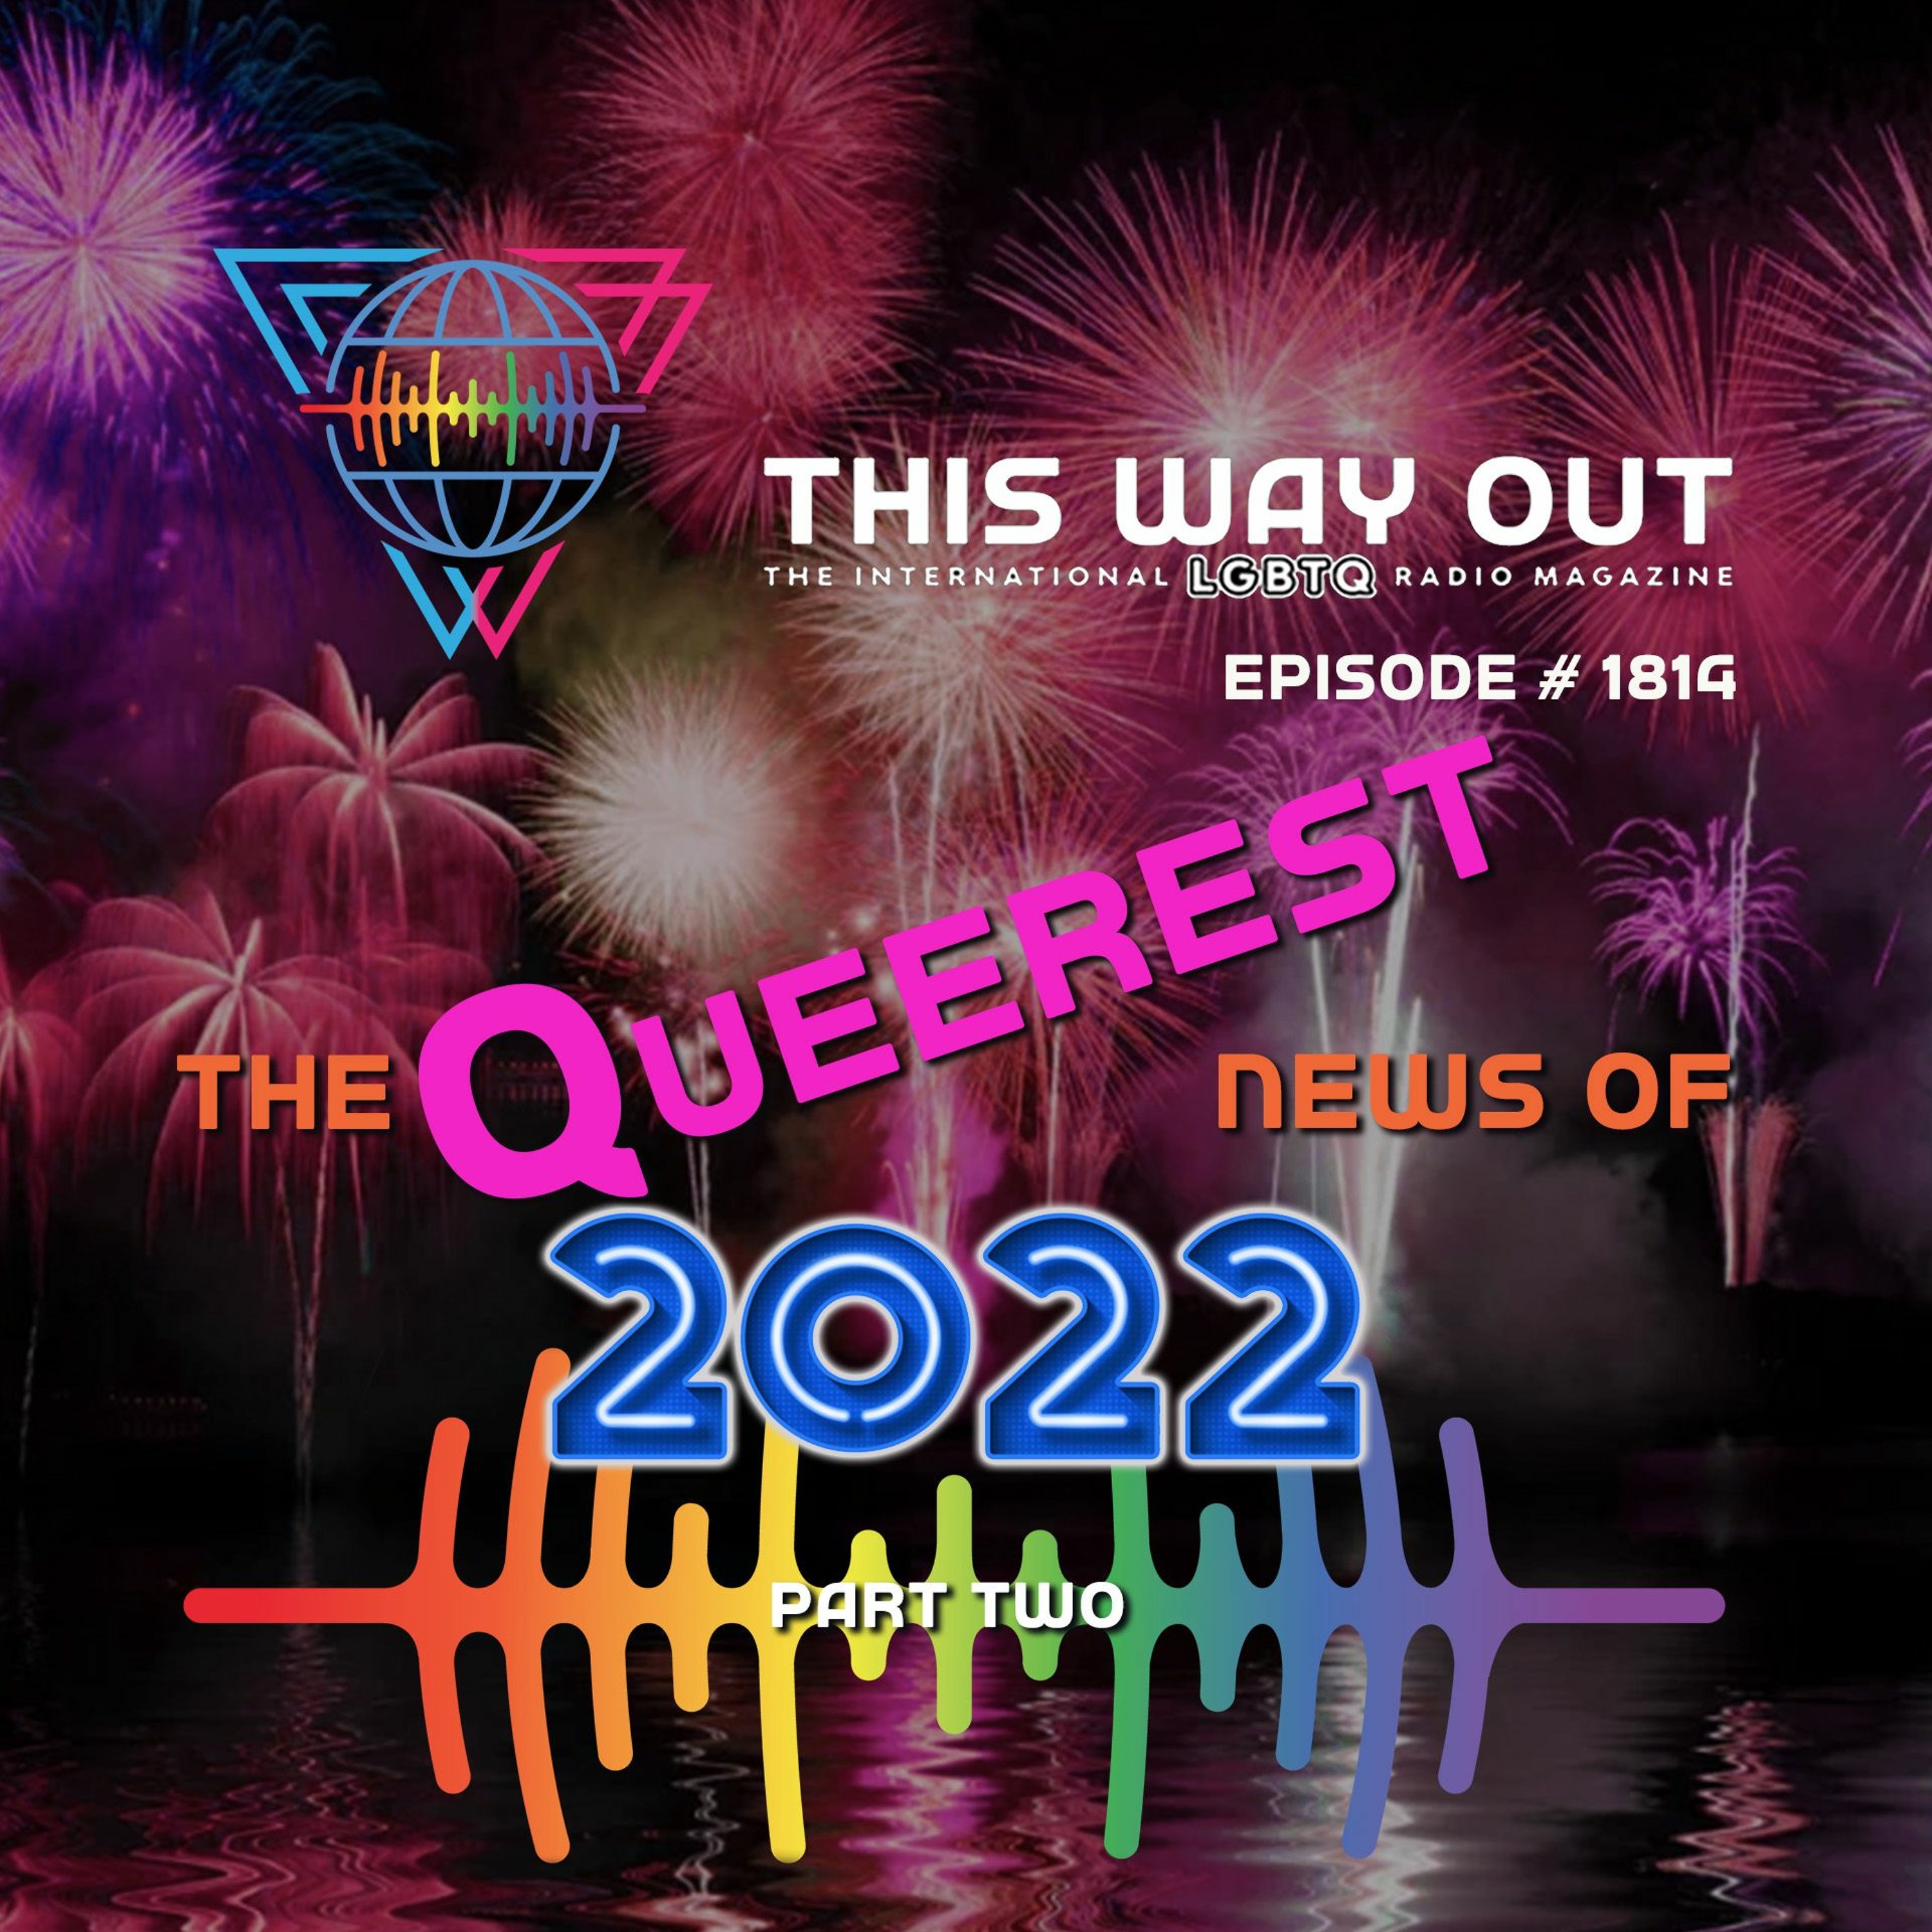 The Queerest News of 2022 (pt. 2)